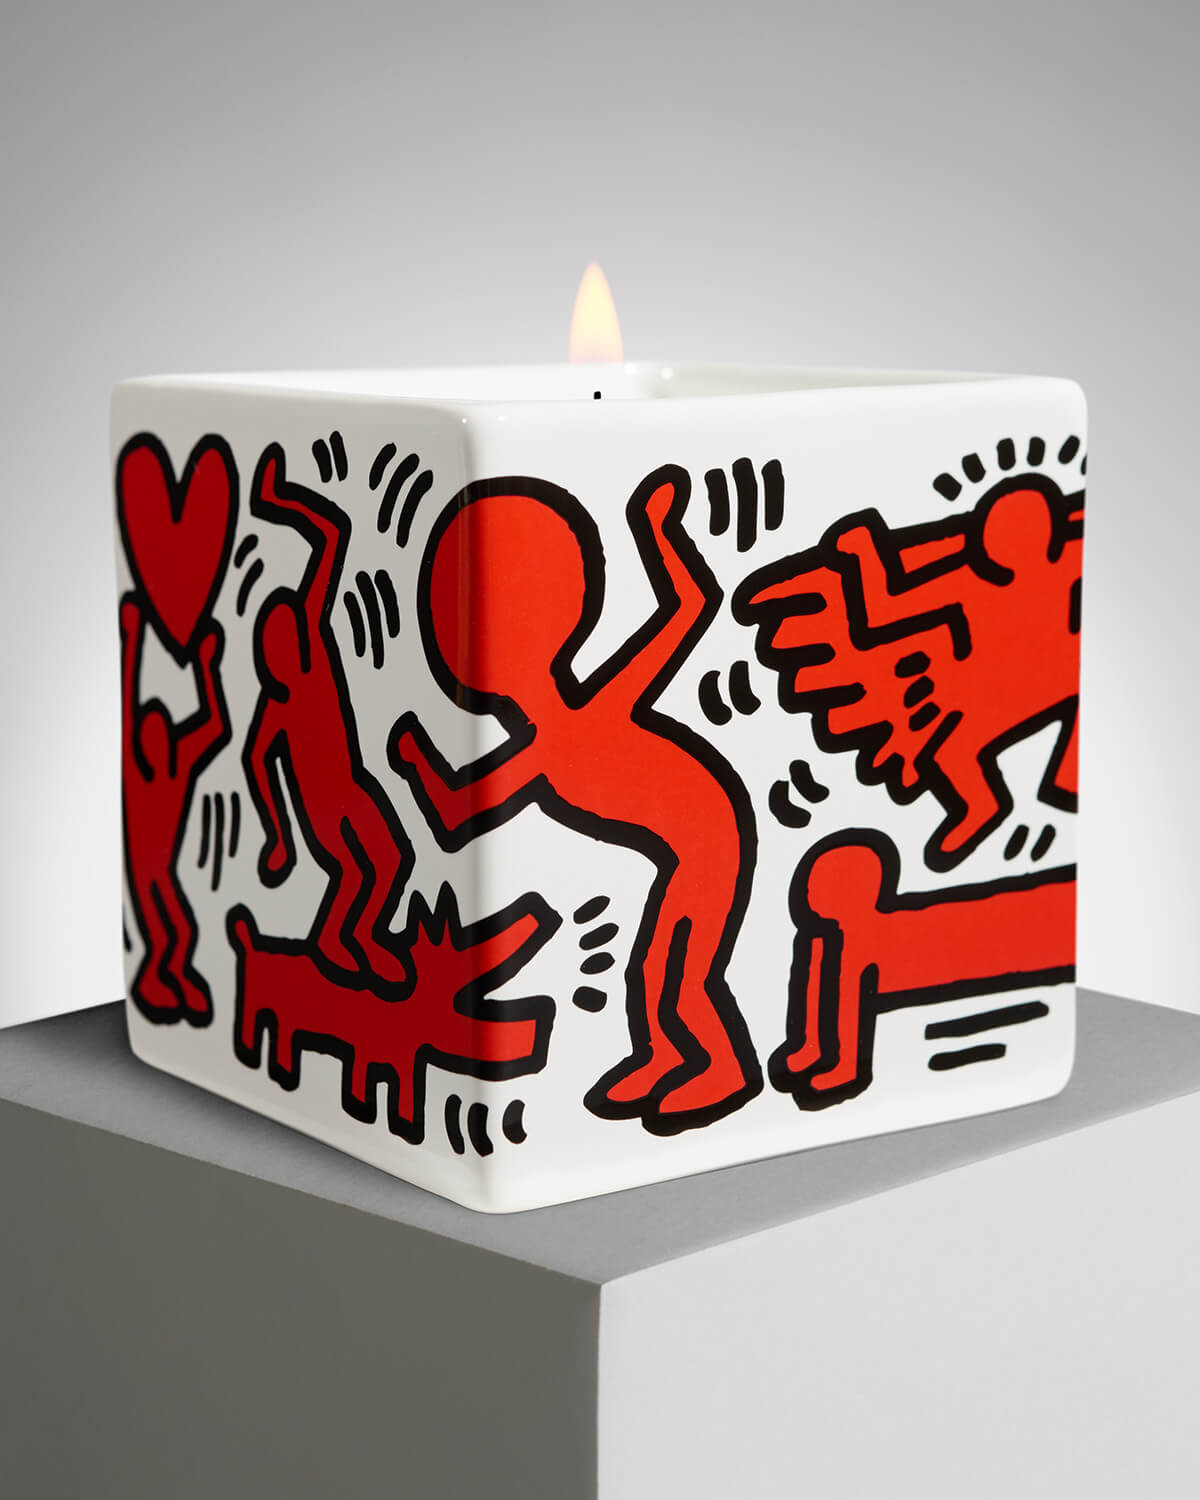 Keith Haring “Red On White” Perfumed Candle - Spiced Plum Scented售價： HKD 610